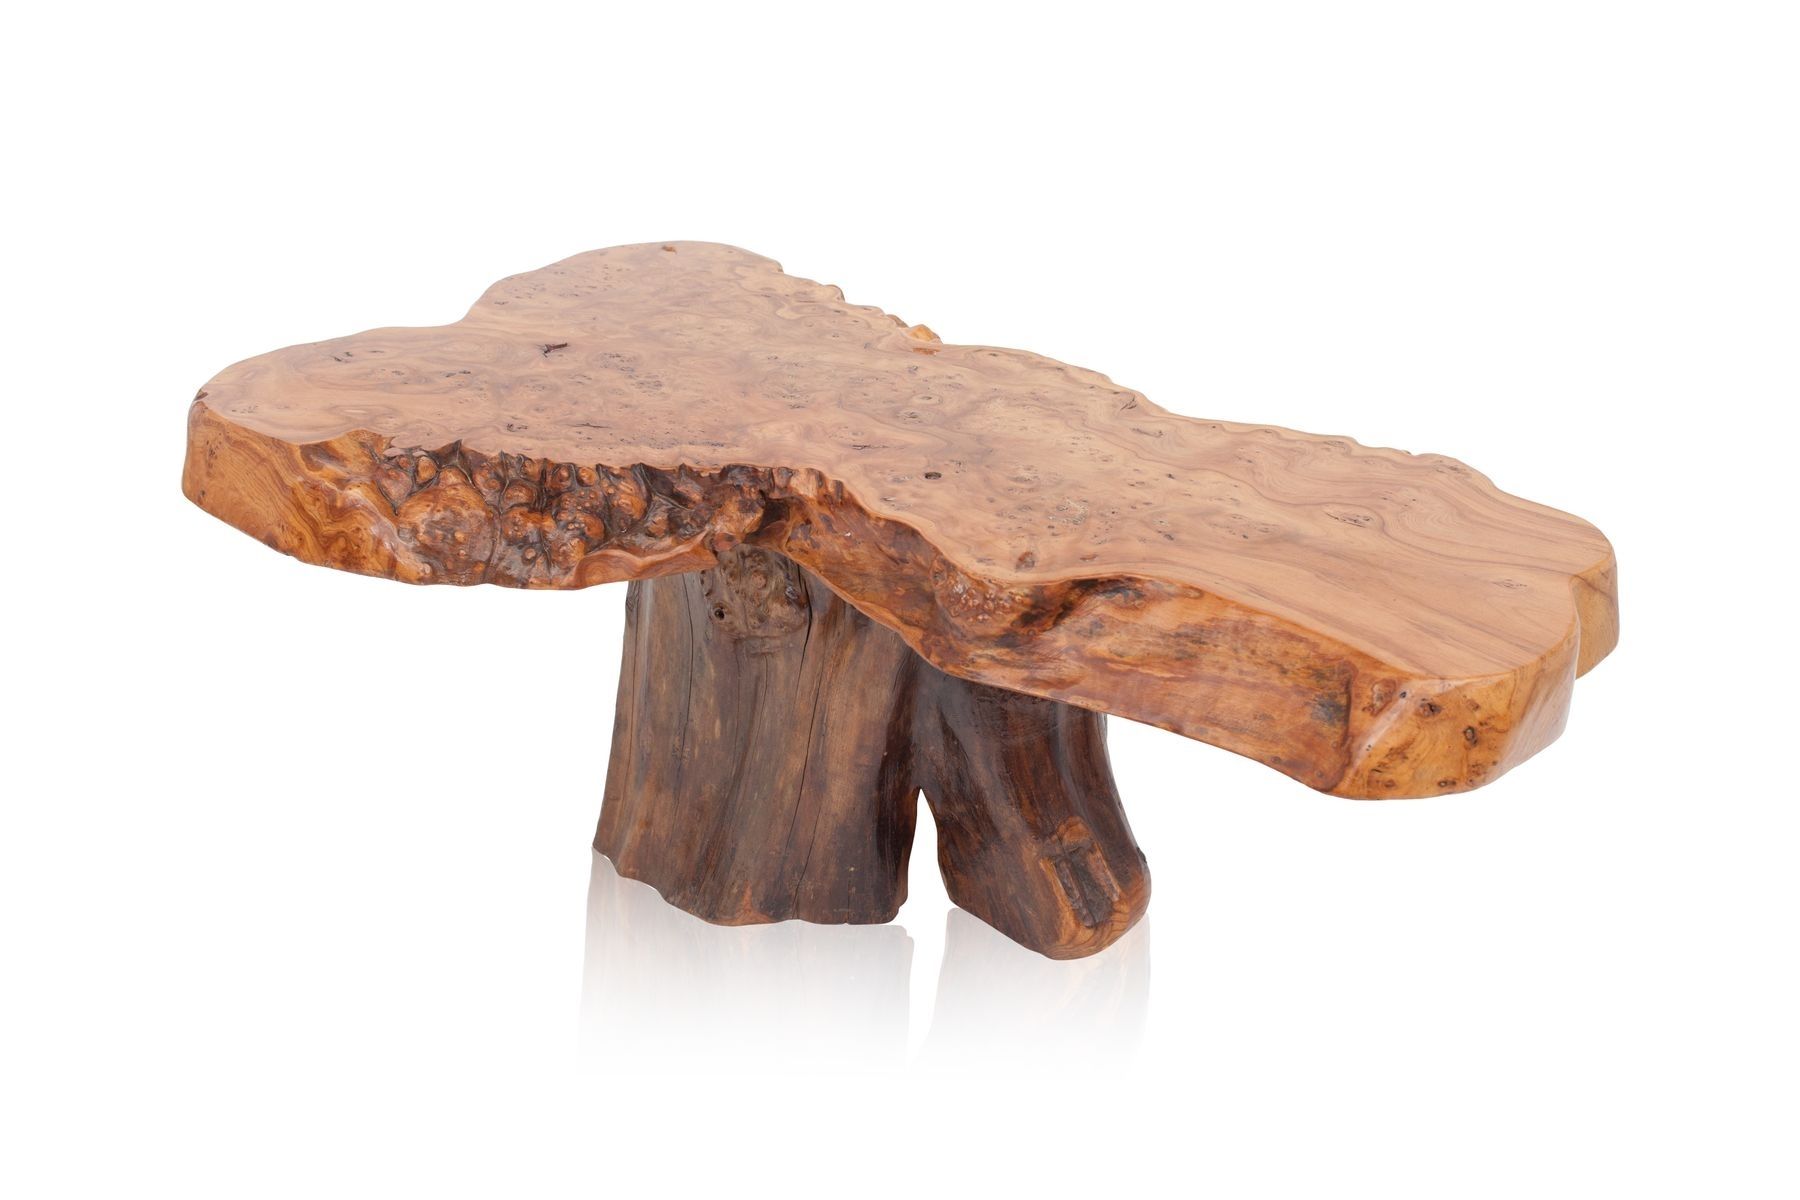 Vintage Natural Burl Wood High Gloss Coffee Table For Sale At Pamono With Regard To Stack Hi Gloss Wood Coffee Tables (View 10 of 30)